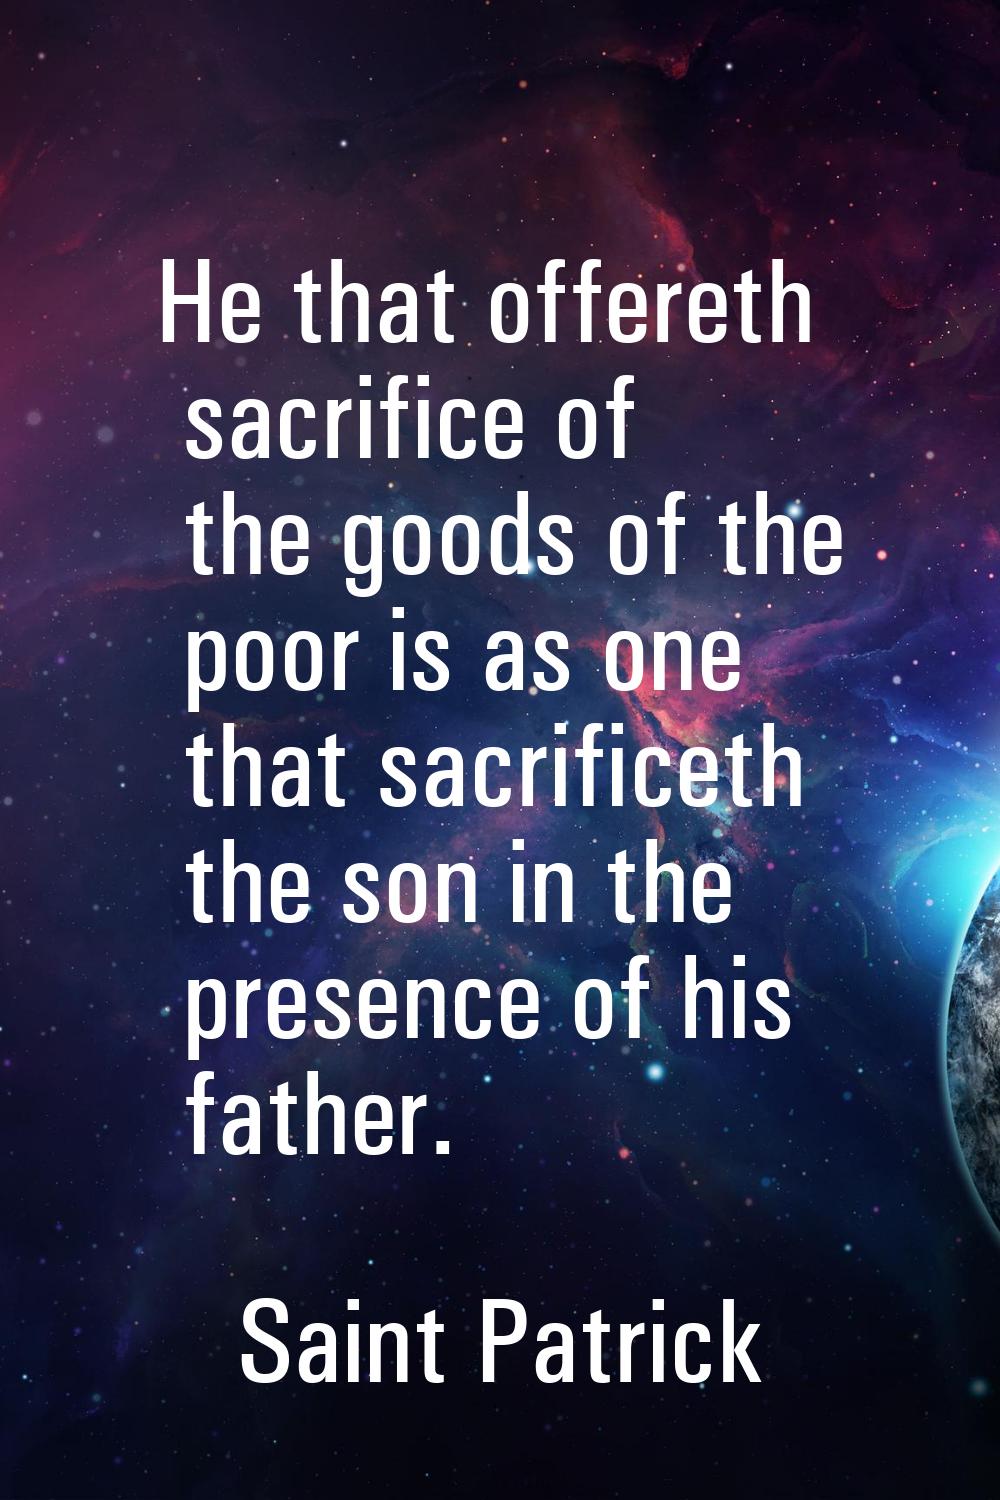 He that offereth sacrifice of the goods of the poor is as one that sacrificeth the son in the prese